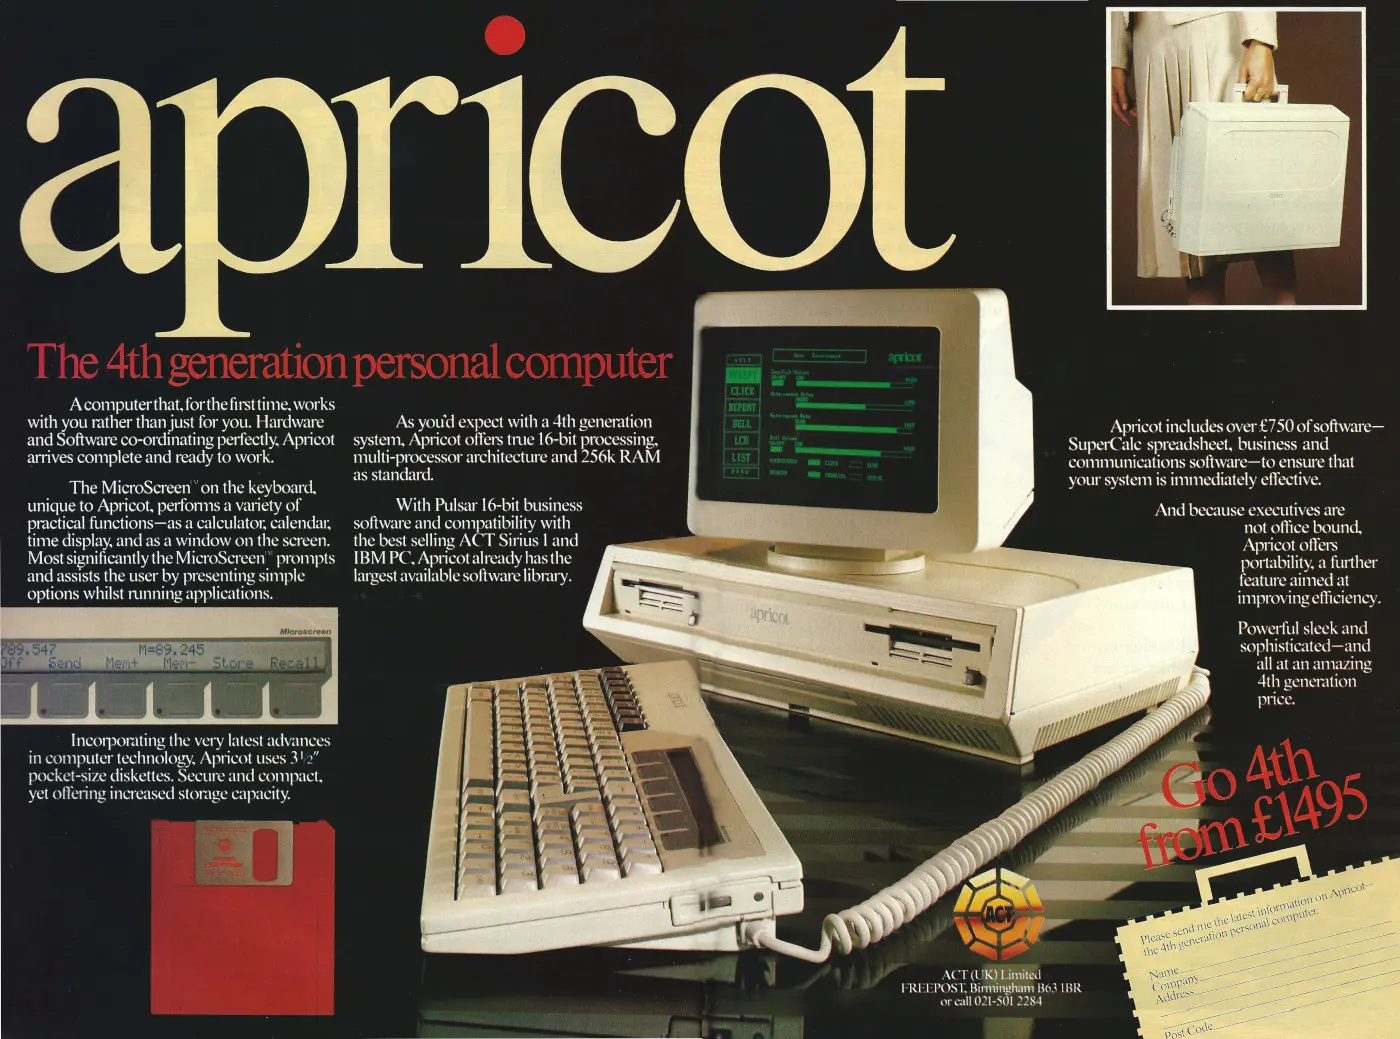 ACT/Apricot Advert: Apricot - the 4th generation personal computer, from Personal Computer World, October 1983